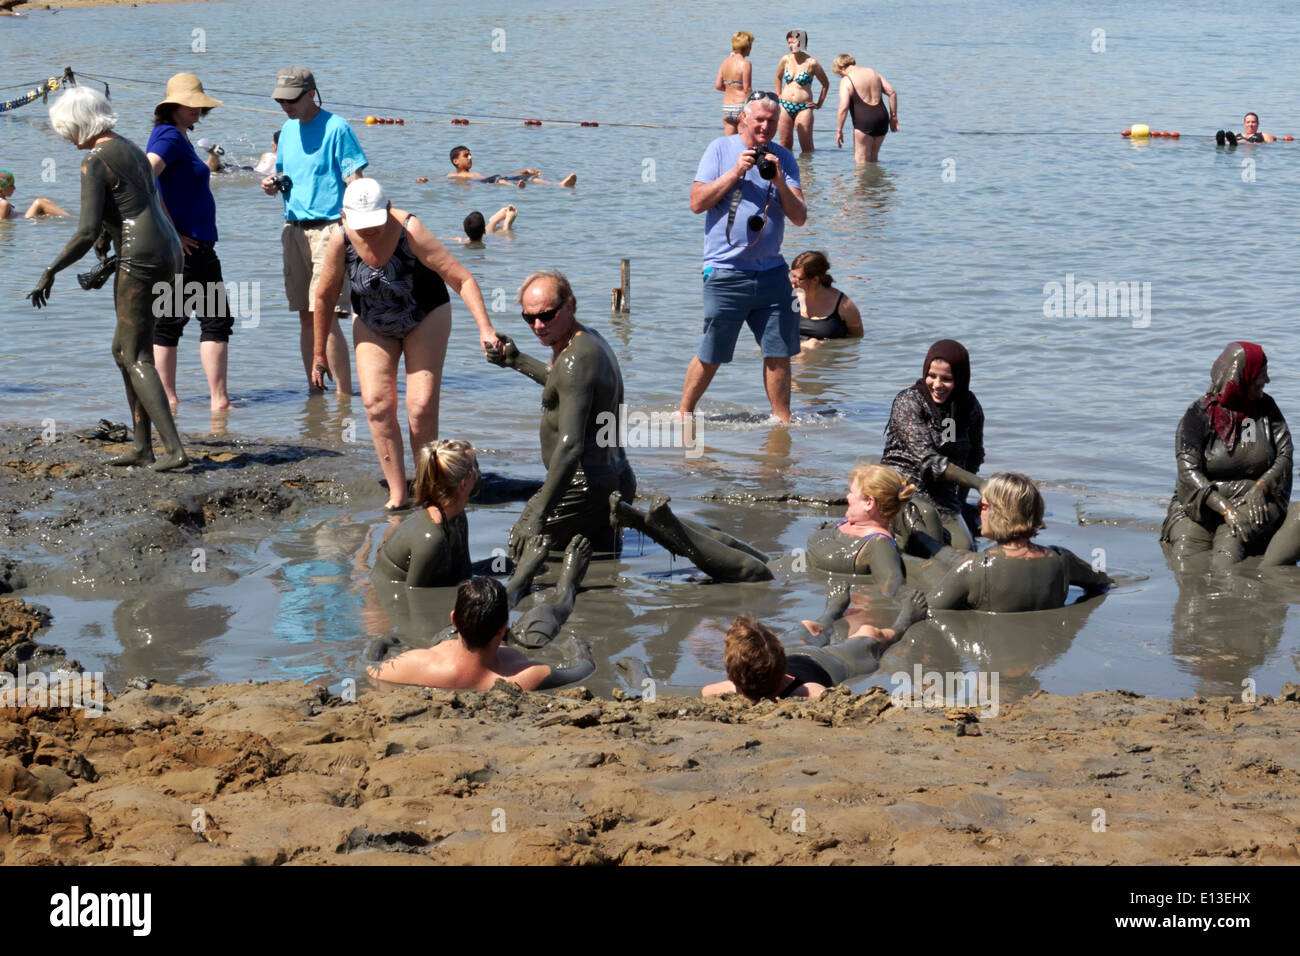 People bathing in the mud in the Dead Sea, Israel Stock Photo